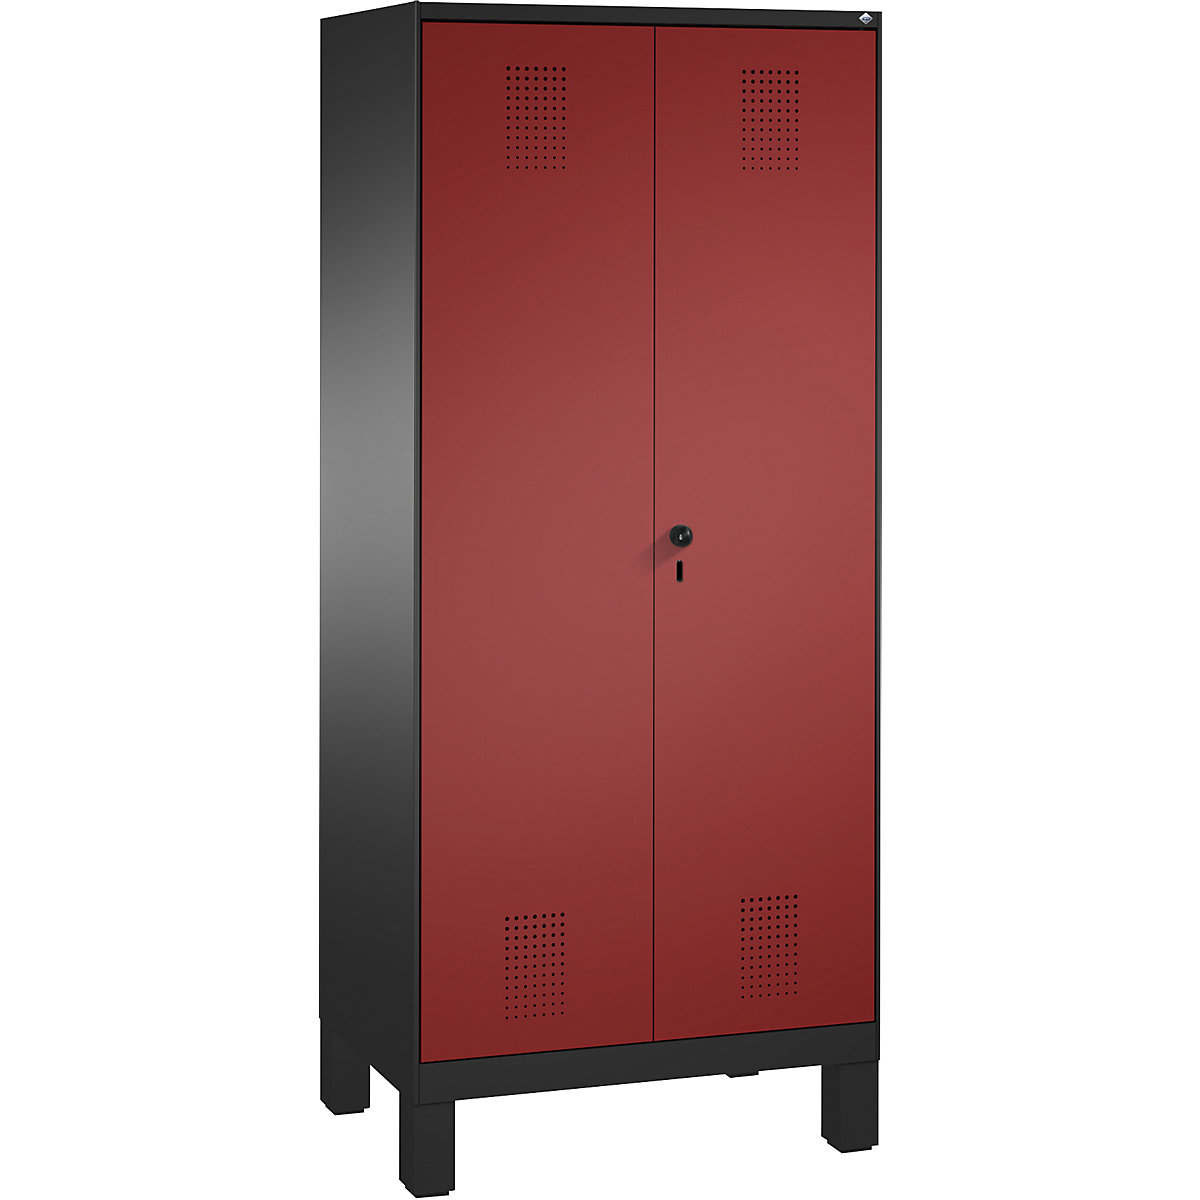 EVOLO storage cupboard, doors close in the middle, with feet – C+P, 2 compartments, 8 shelves, compartment width 400 mm, black grey / ruby red-7